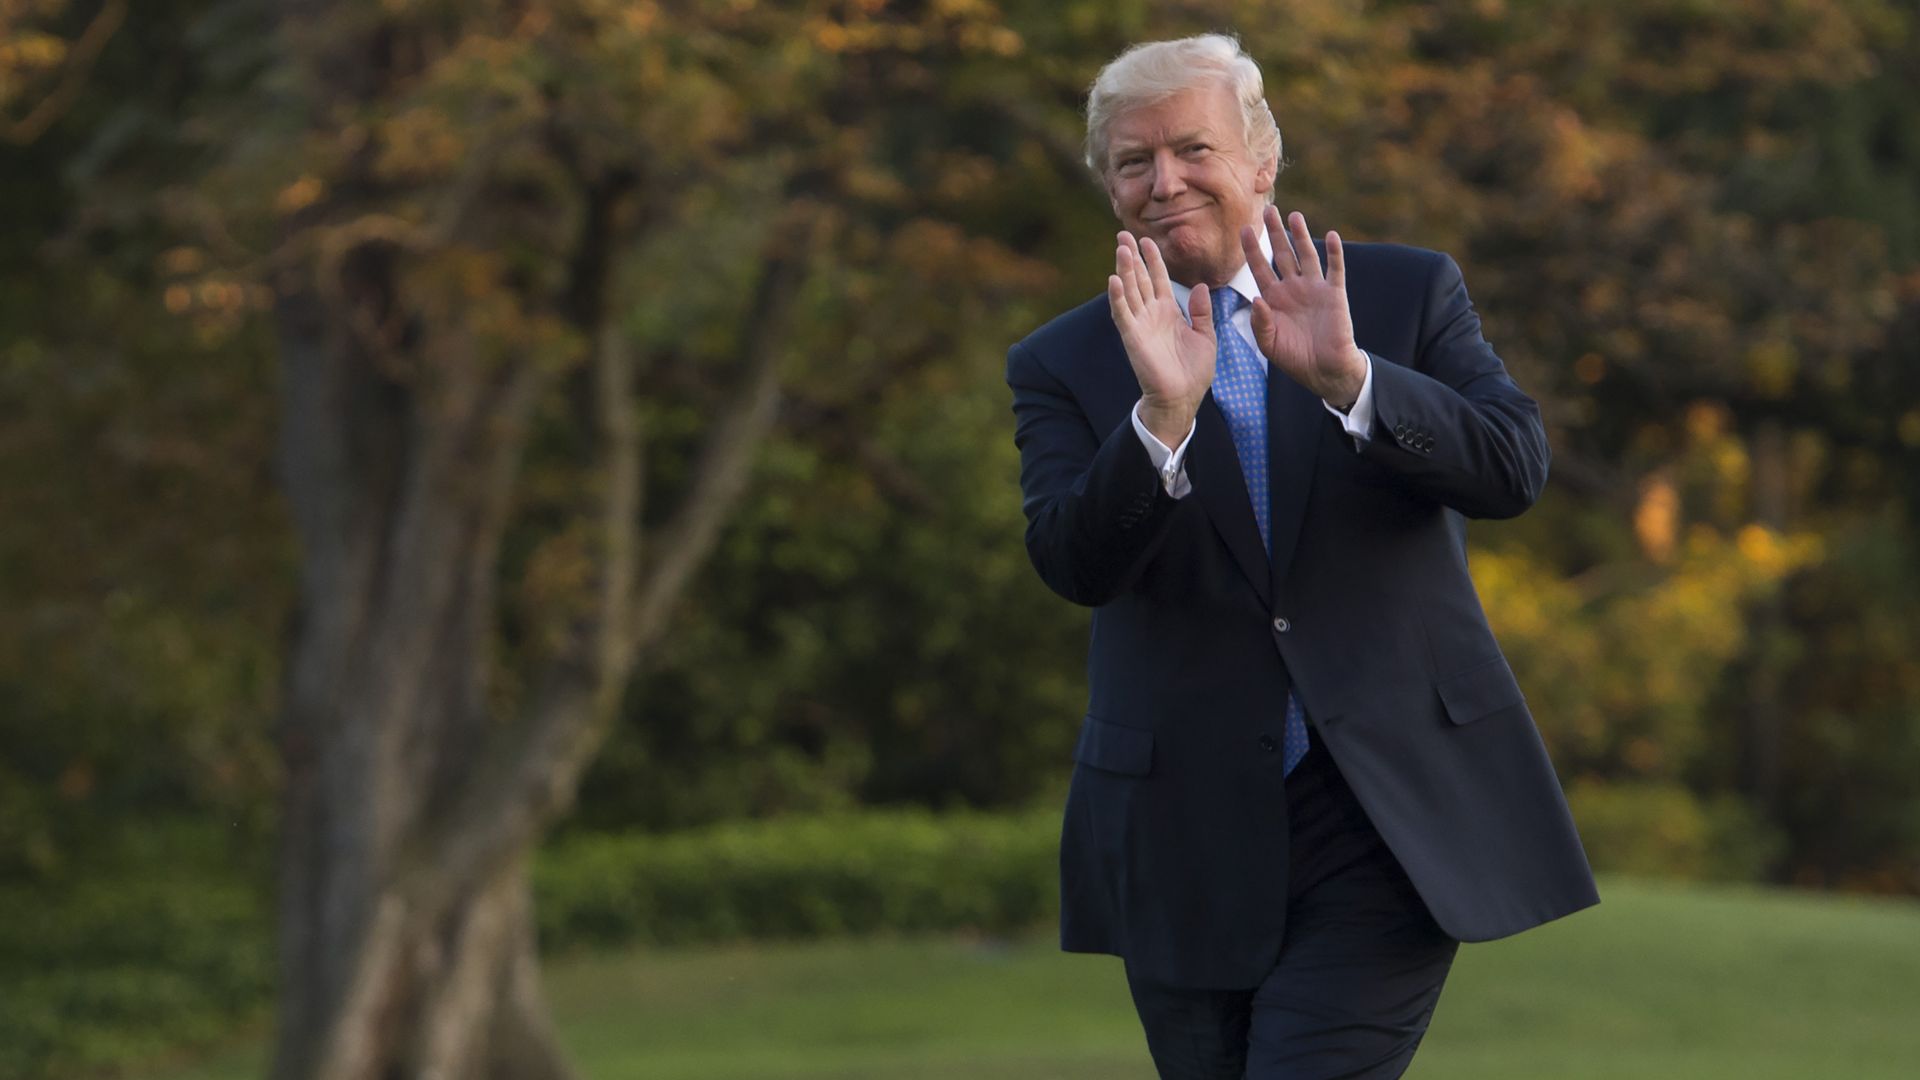 President Trump walking on the lawn with his hands up